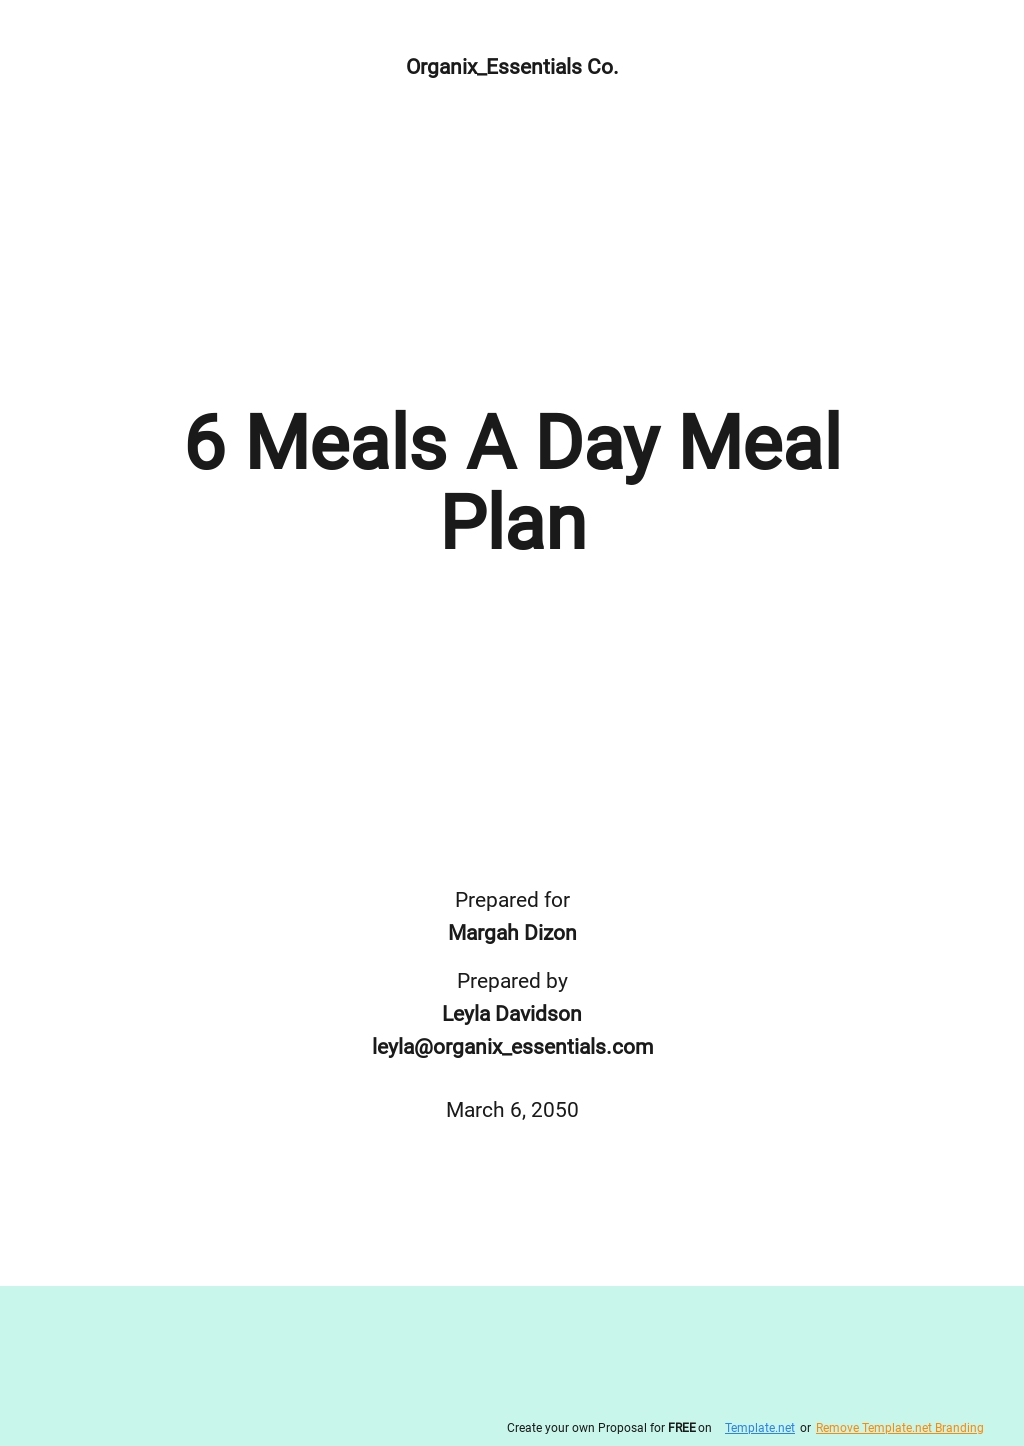 6 Meals a Day Meal Plans in Word Templates, Designs, Docs, Free